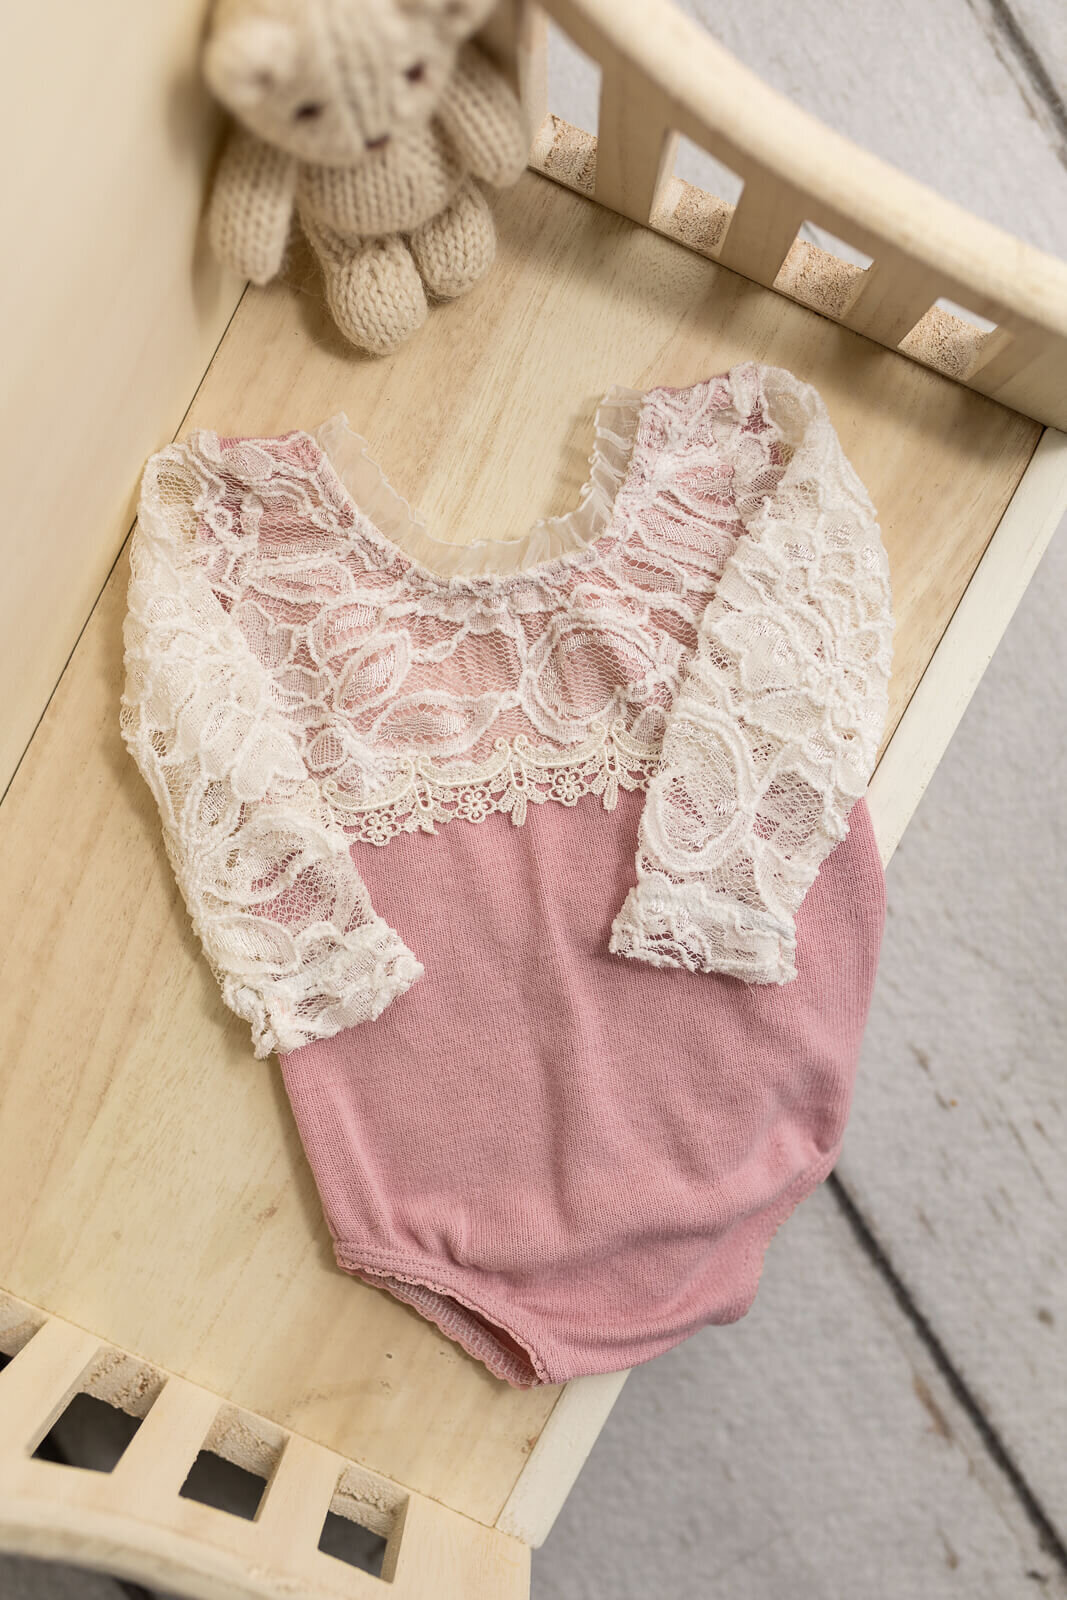 Sweet lace top with pink bottom newborn photography  girl outfit.